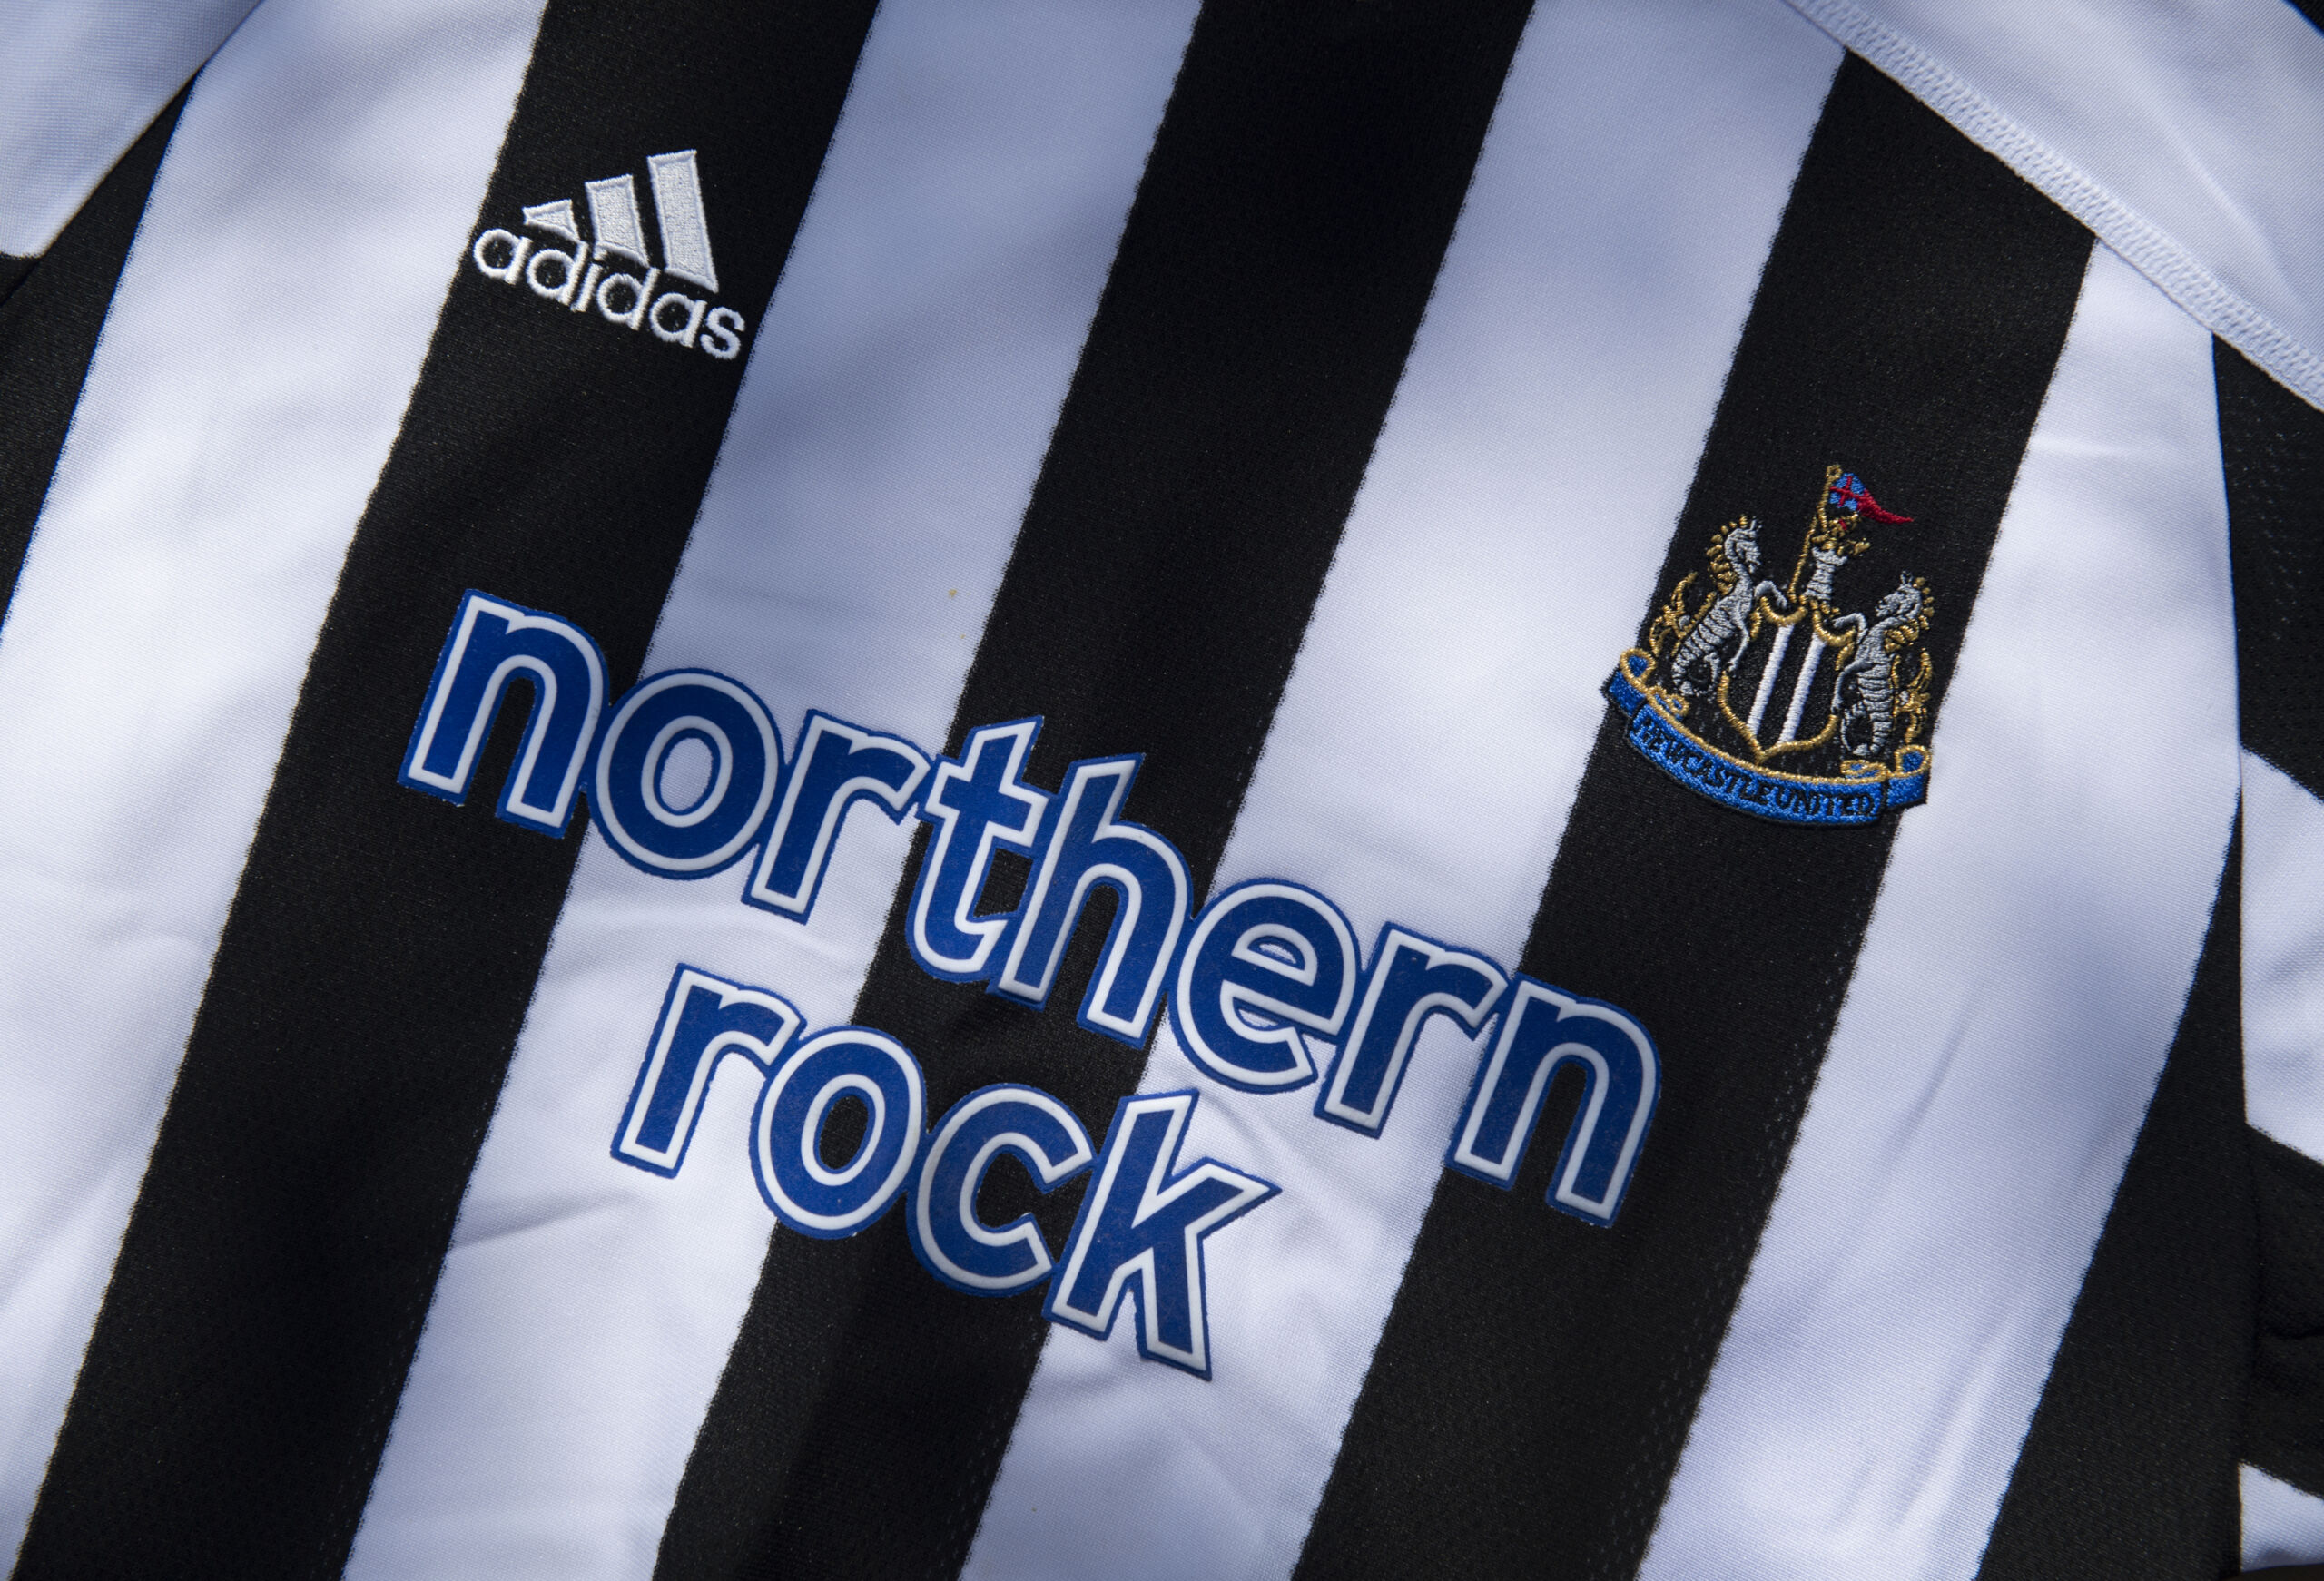 Newcastle United adidas home kit with Northern Rock